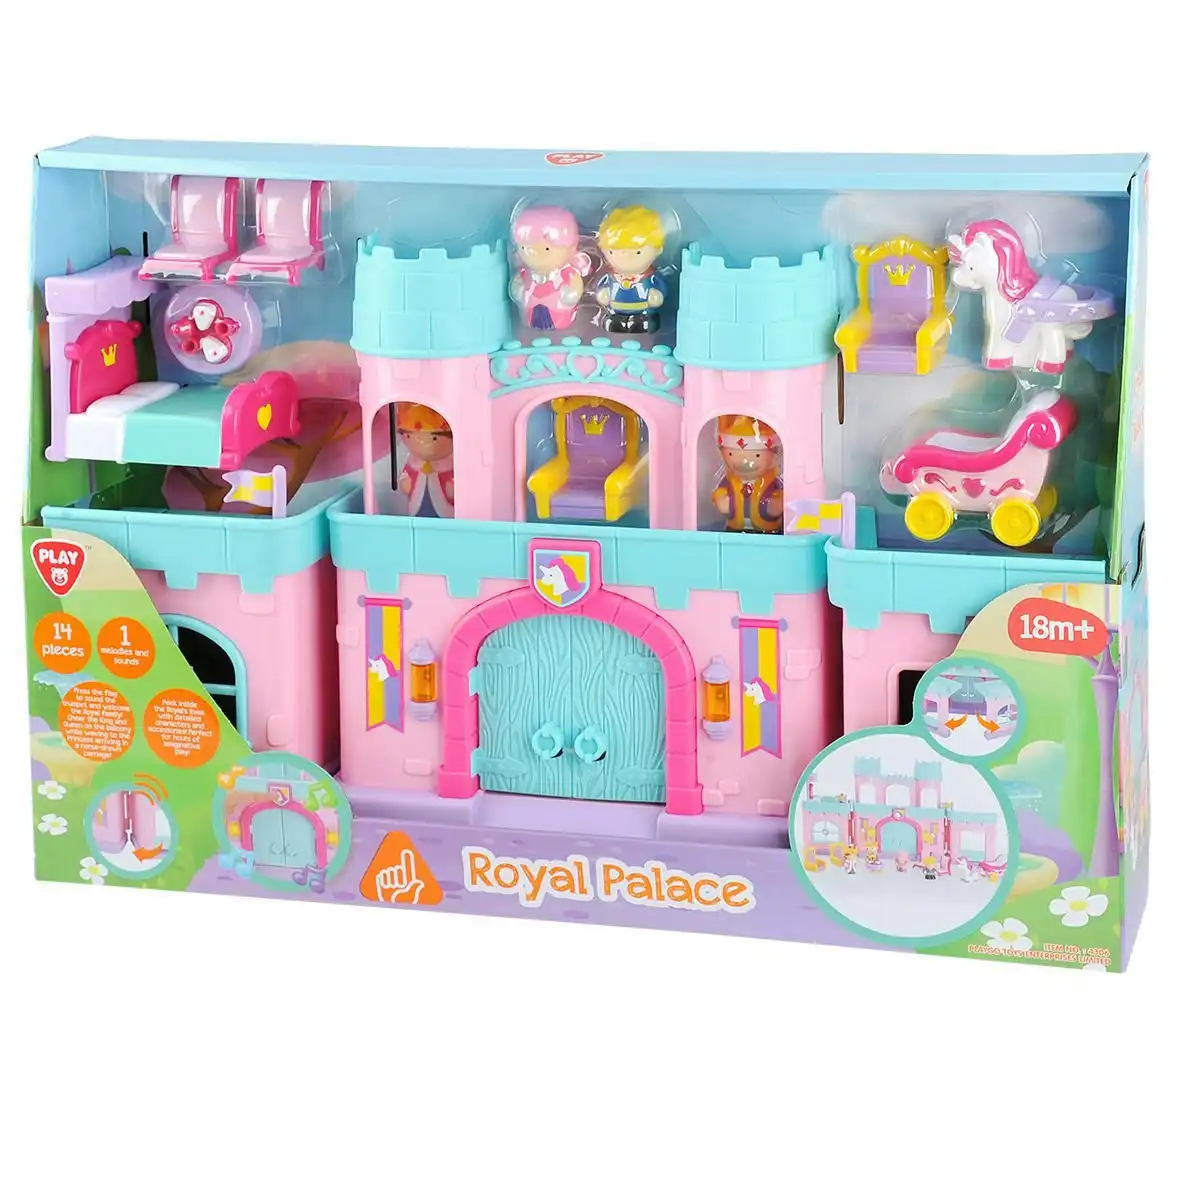 Battery Operated Royal Palace  Playgo Toys Ent. Ltd